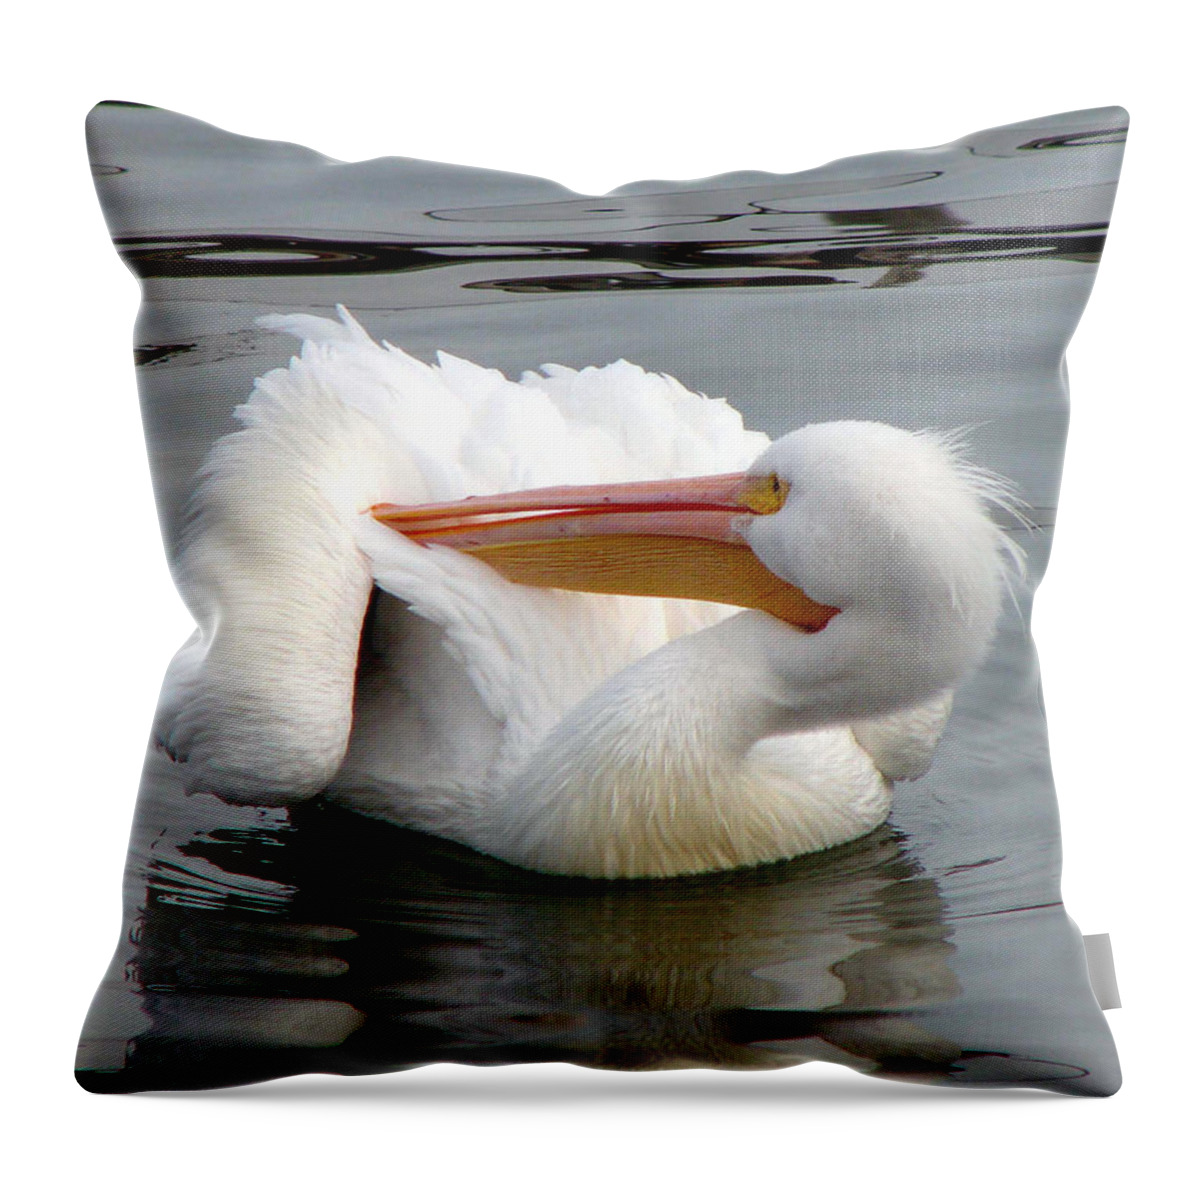 Pelican Throw Pillow featuring the photograph Texas Gulf Coast White Pelican by Linda Cox